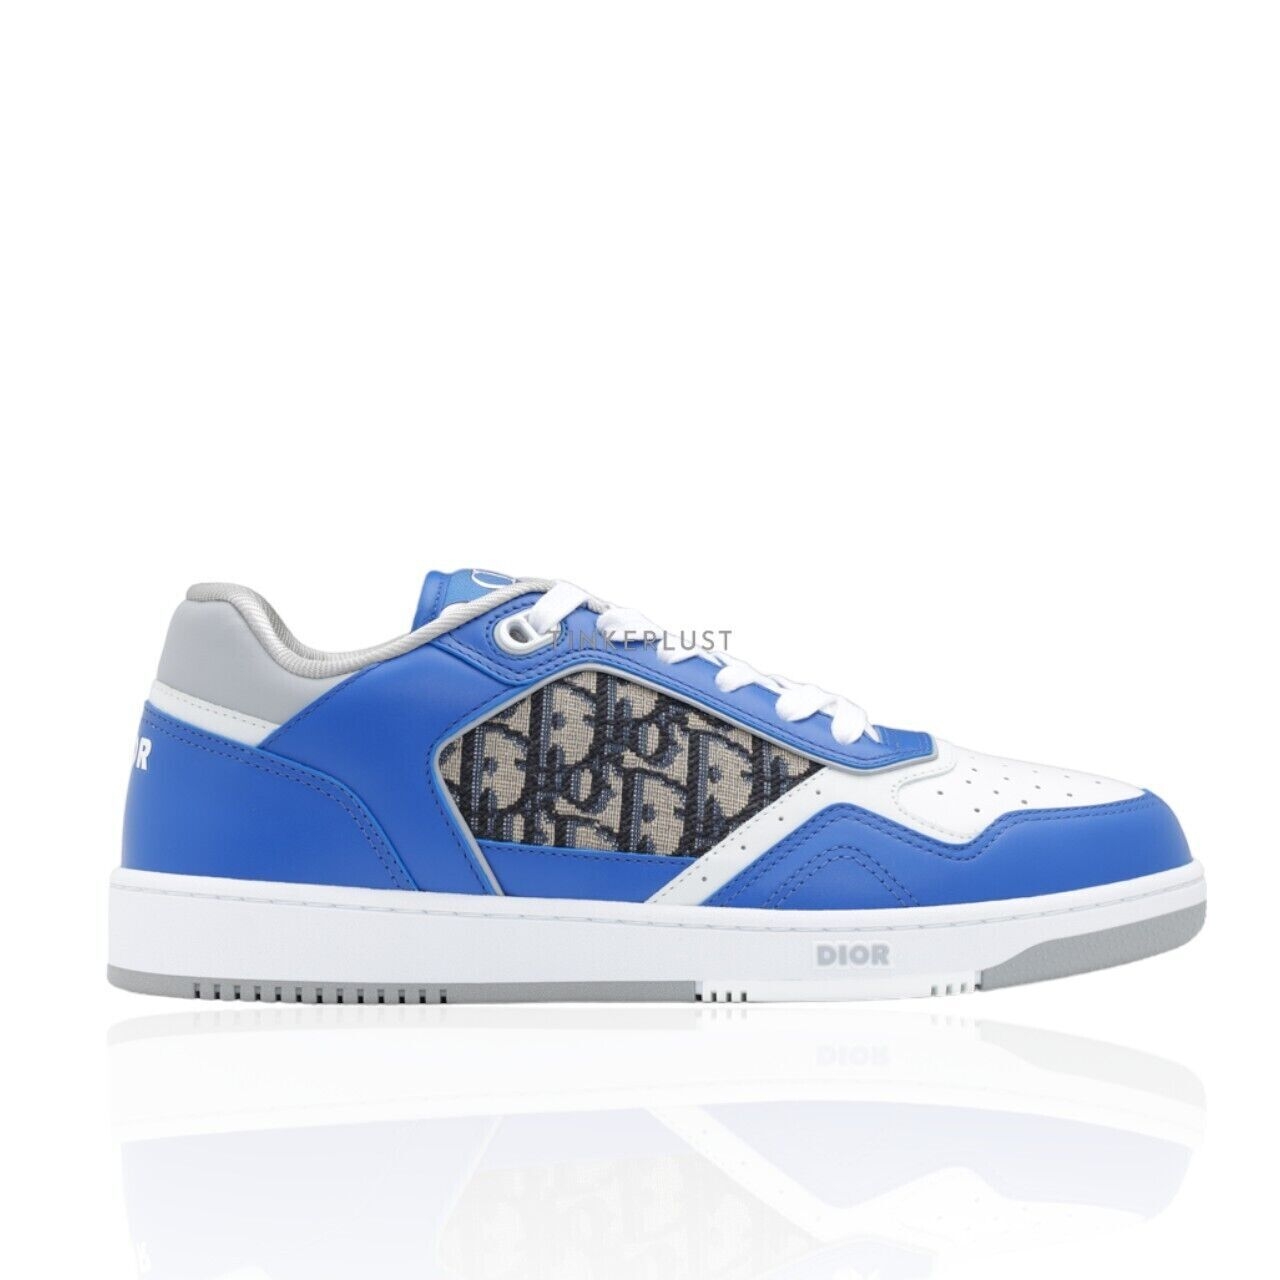 Christian Dior B27 Oblique in Blue/Gray/White Multicolors Low Top Sneakers